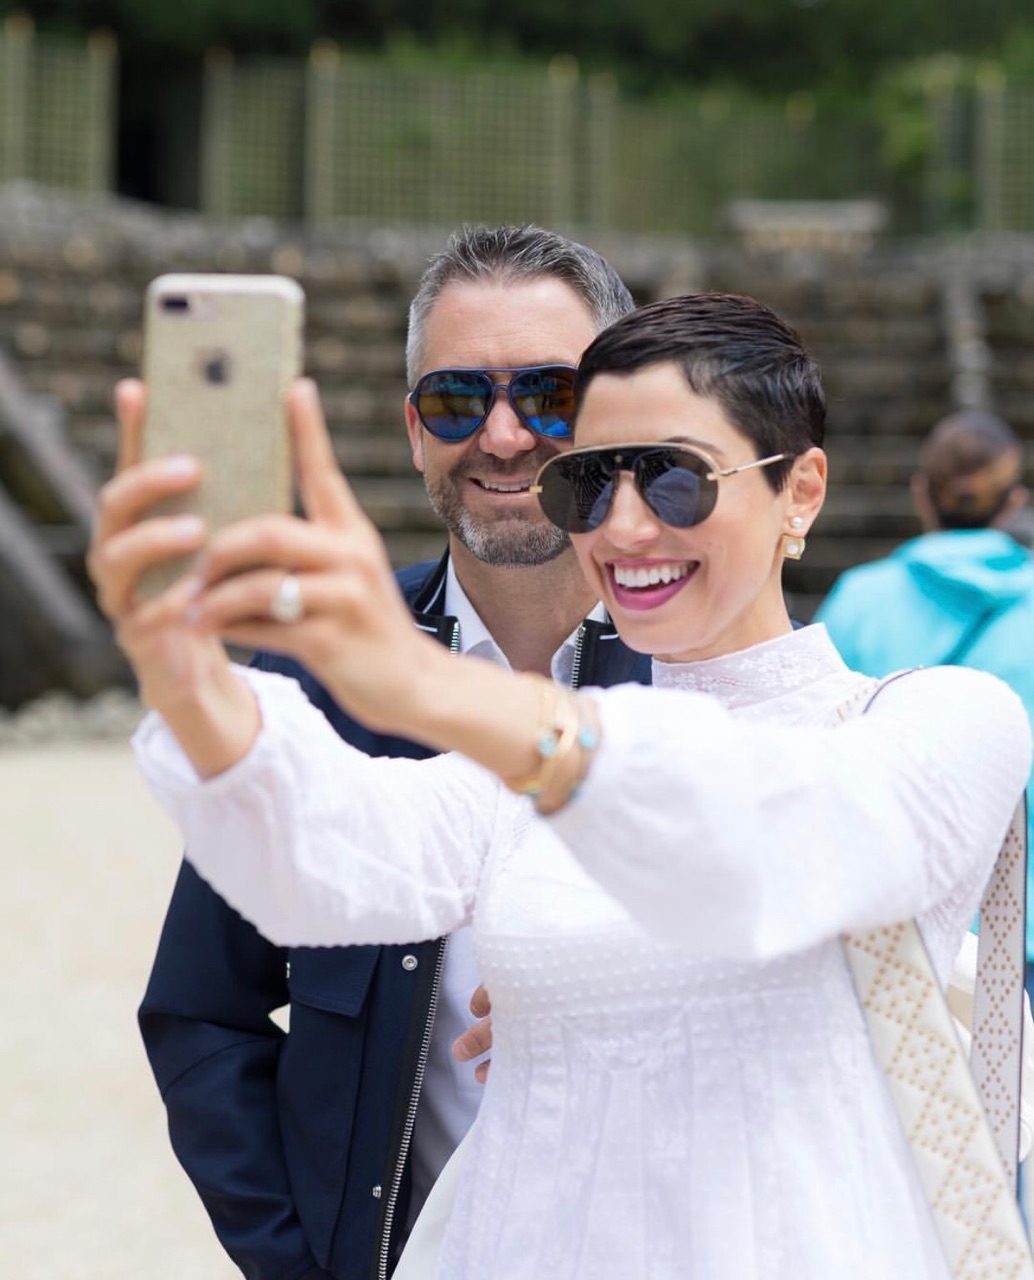 Chrisa Pappas and Dean Sioukas pose for a selfie at Versaille